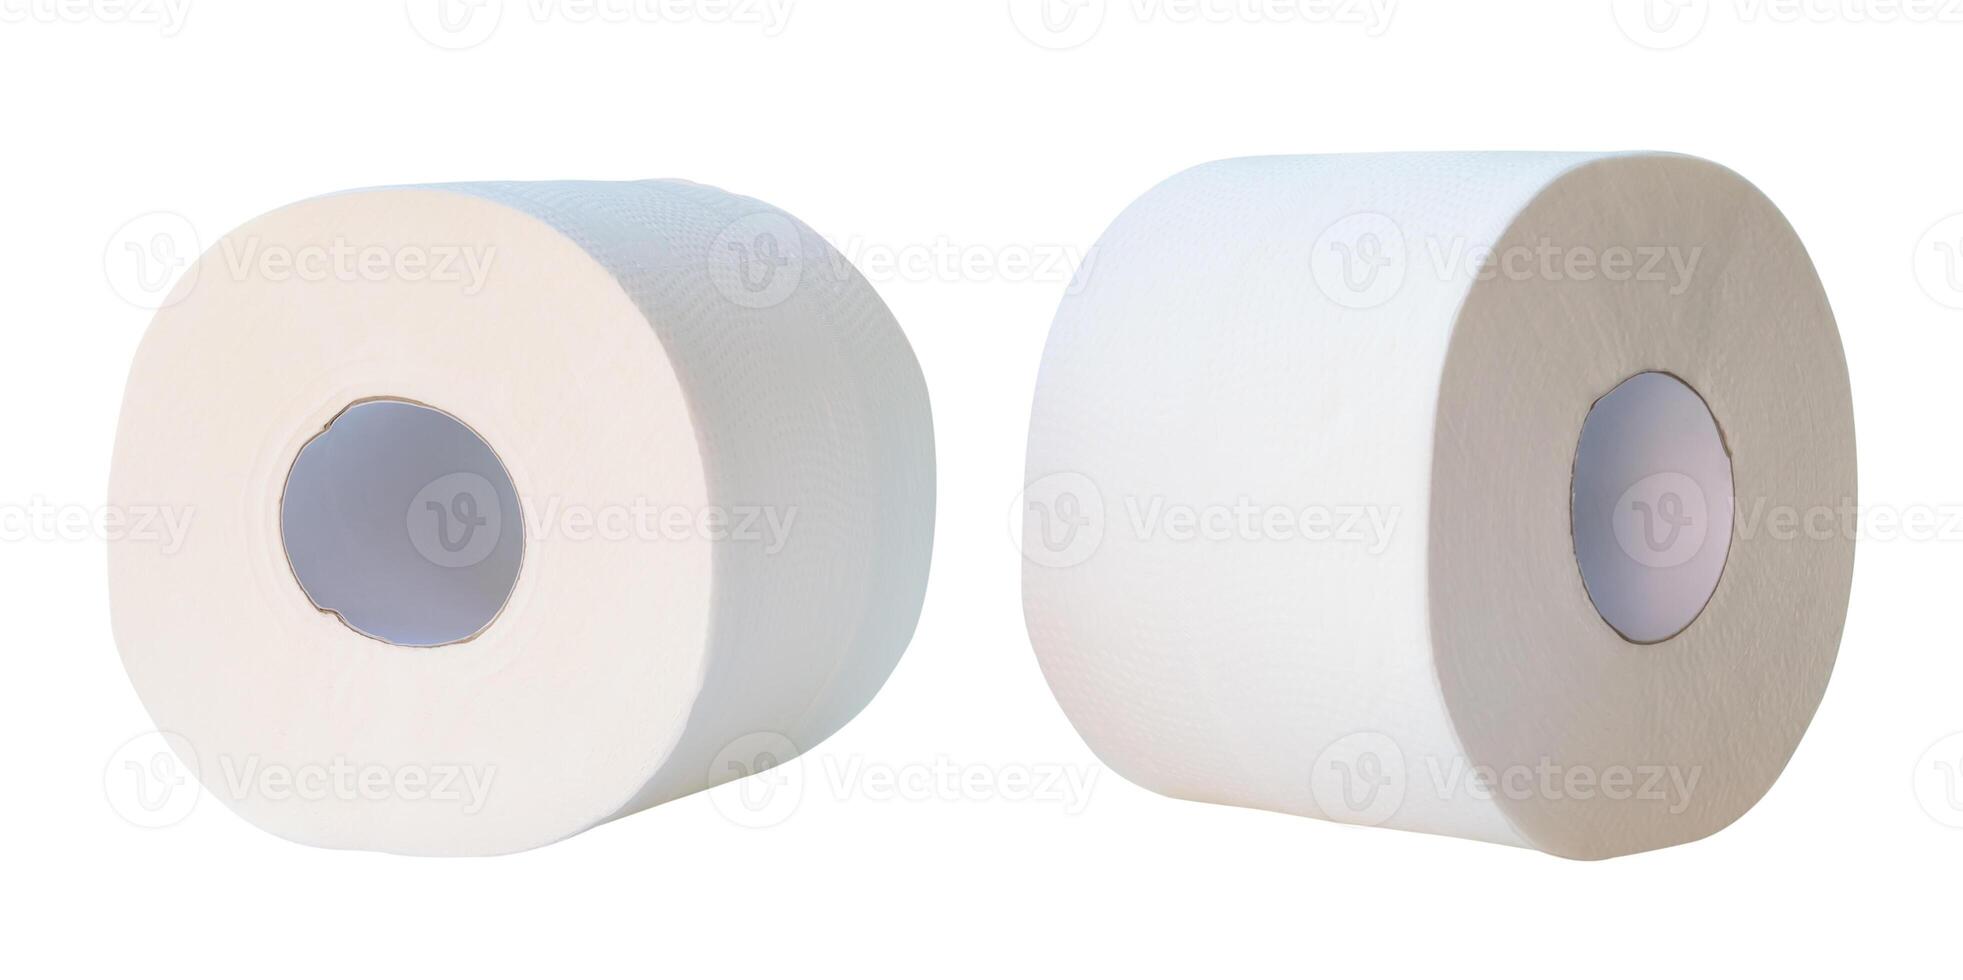 Front view or side view set of tissue paper or toilet paper rolls isolated on white background with clipping path photo